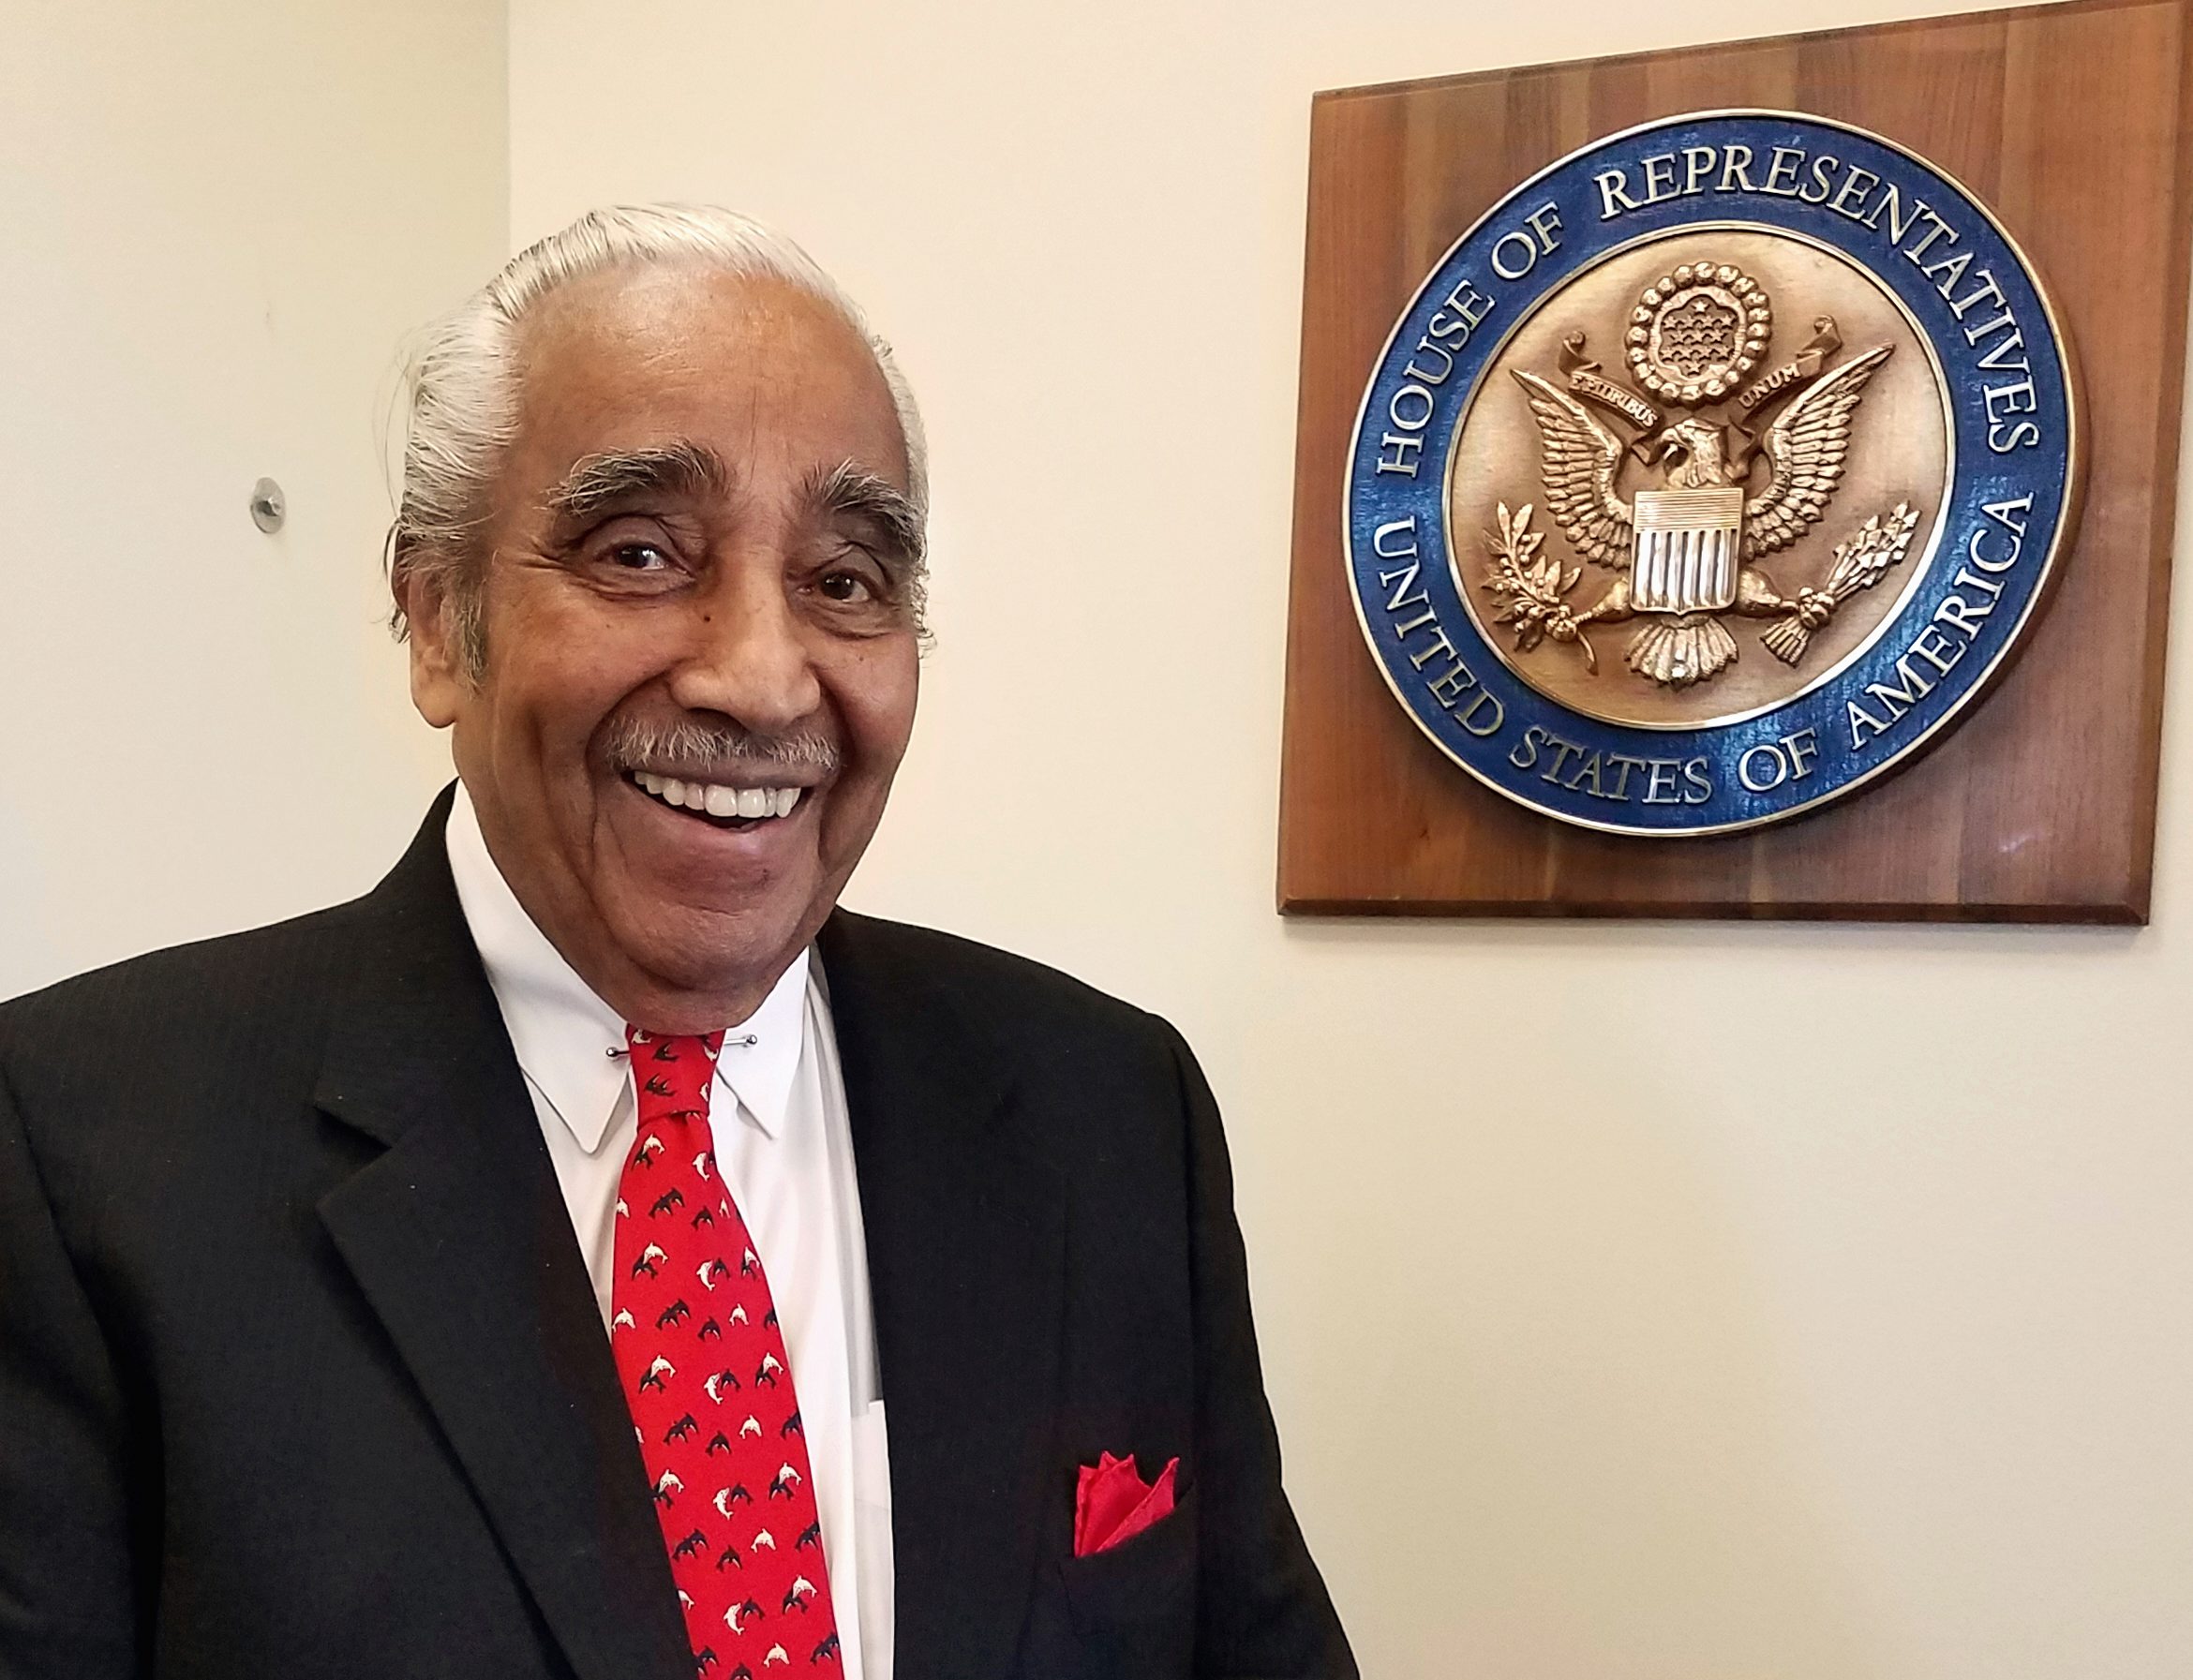 Charles Rangel at peace leaving Capitol Hill amid political strife: 'It's  time to get out' - Washington Times